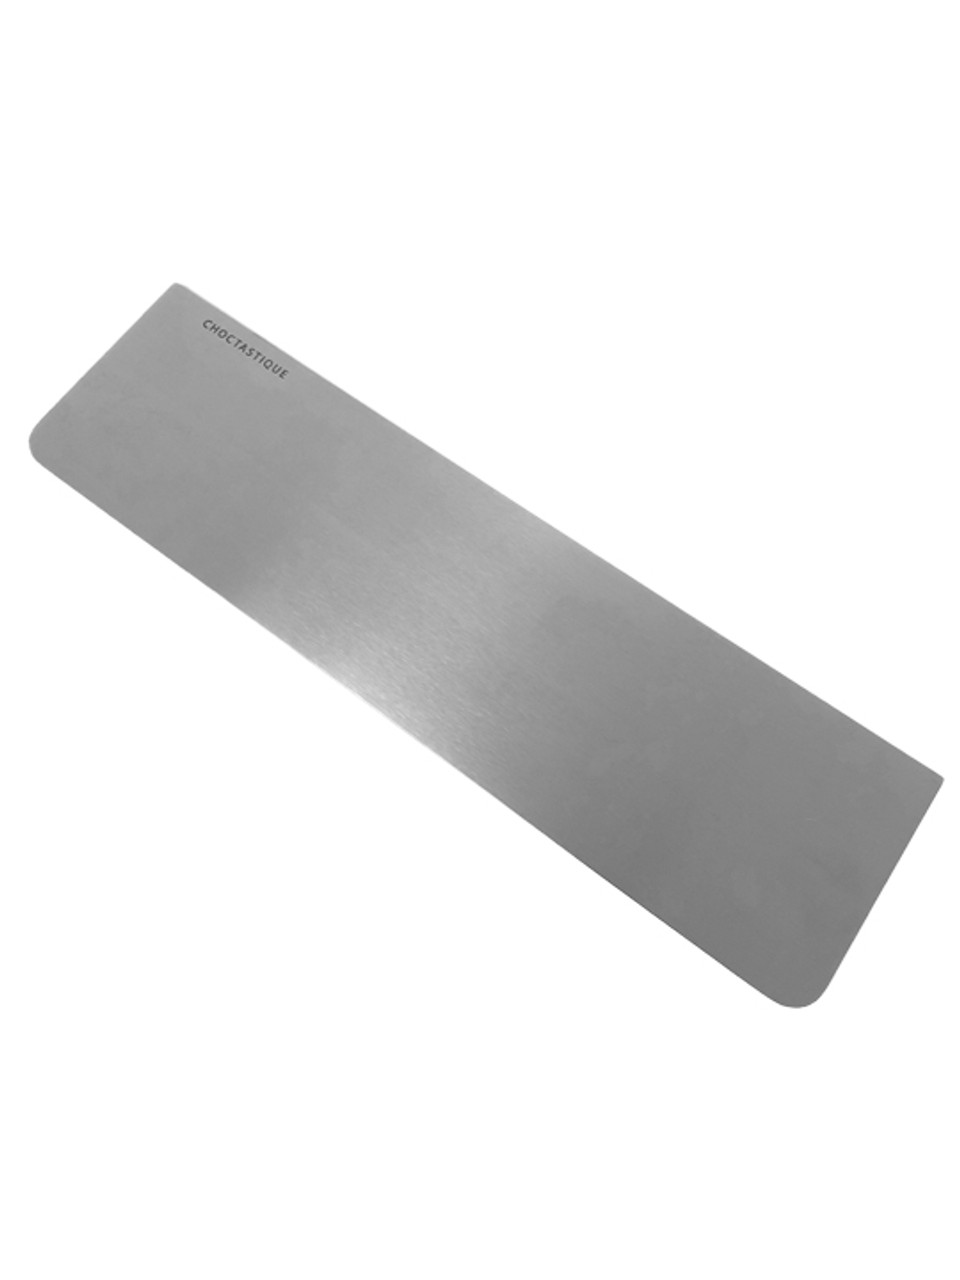 Extra Large Choctastique Stainless Steel Cake Scraper 30cm